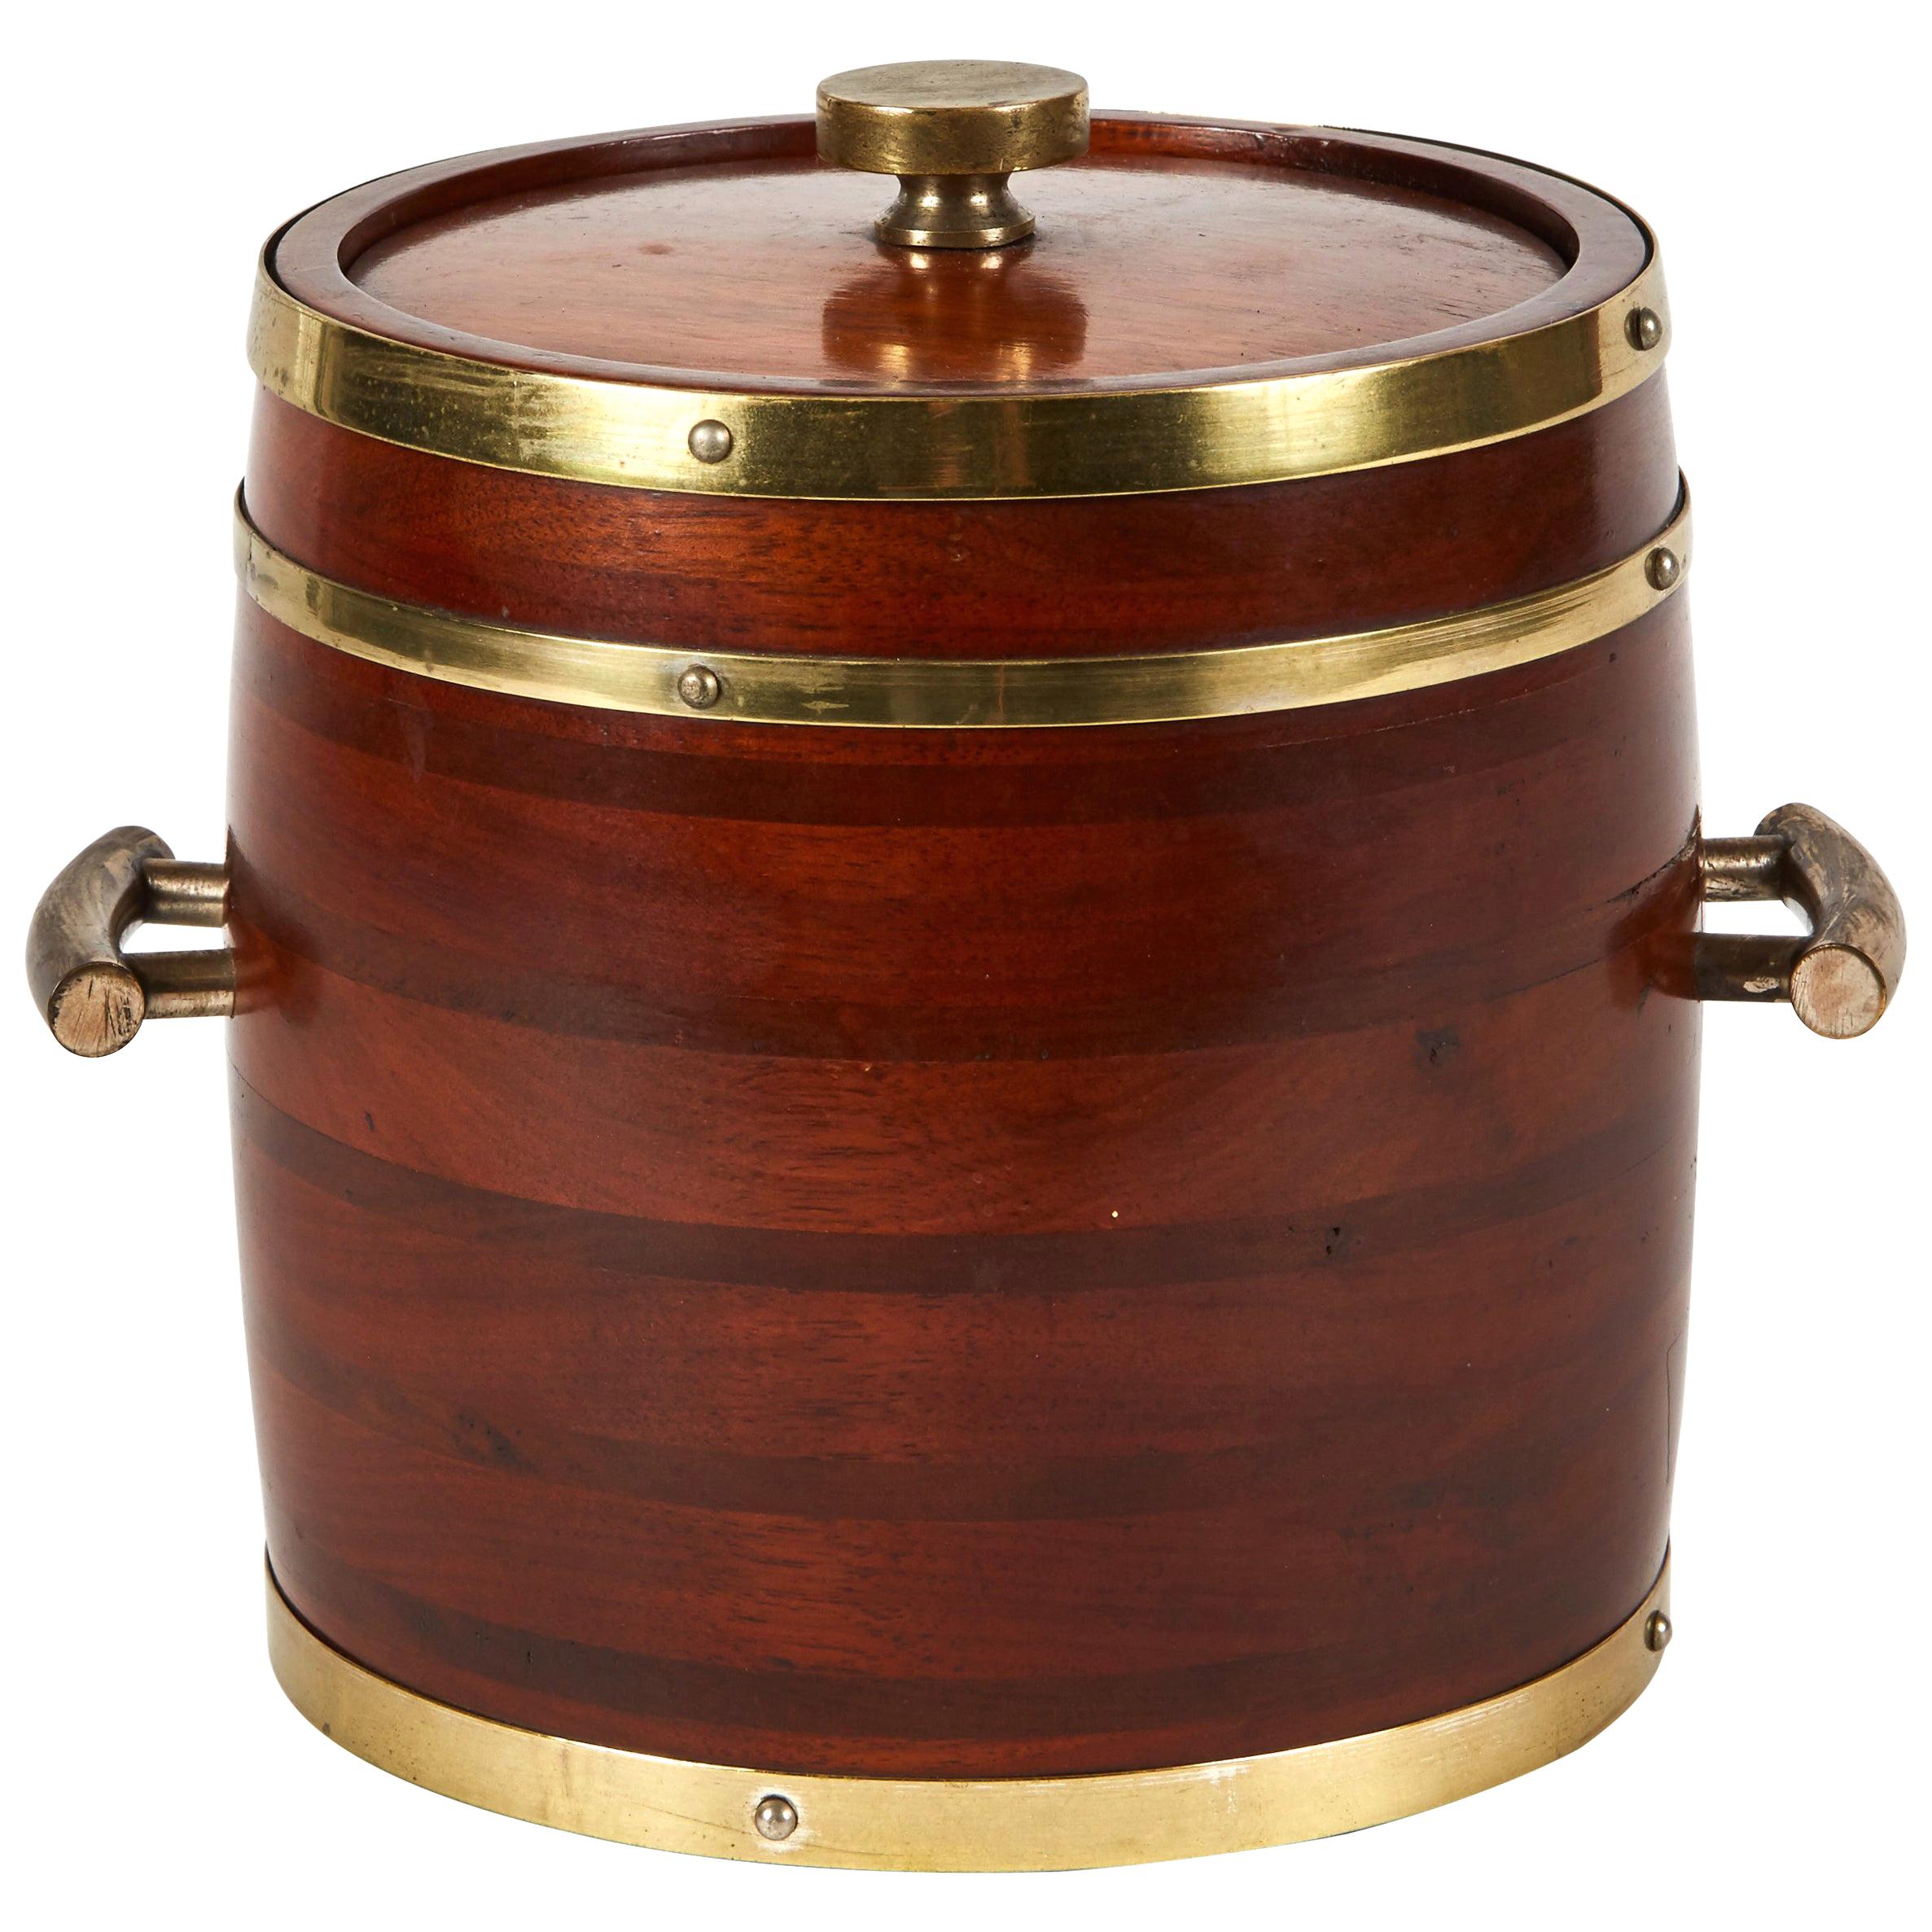 Wooden Ice Bucket with Brass Fittings from England, circa 1920